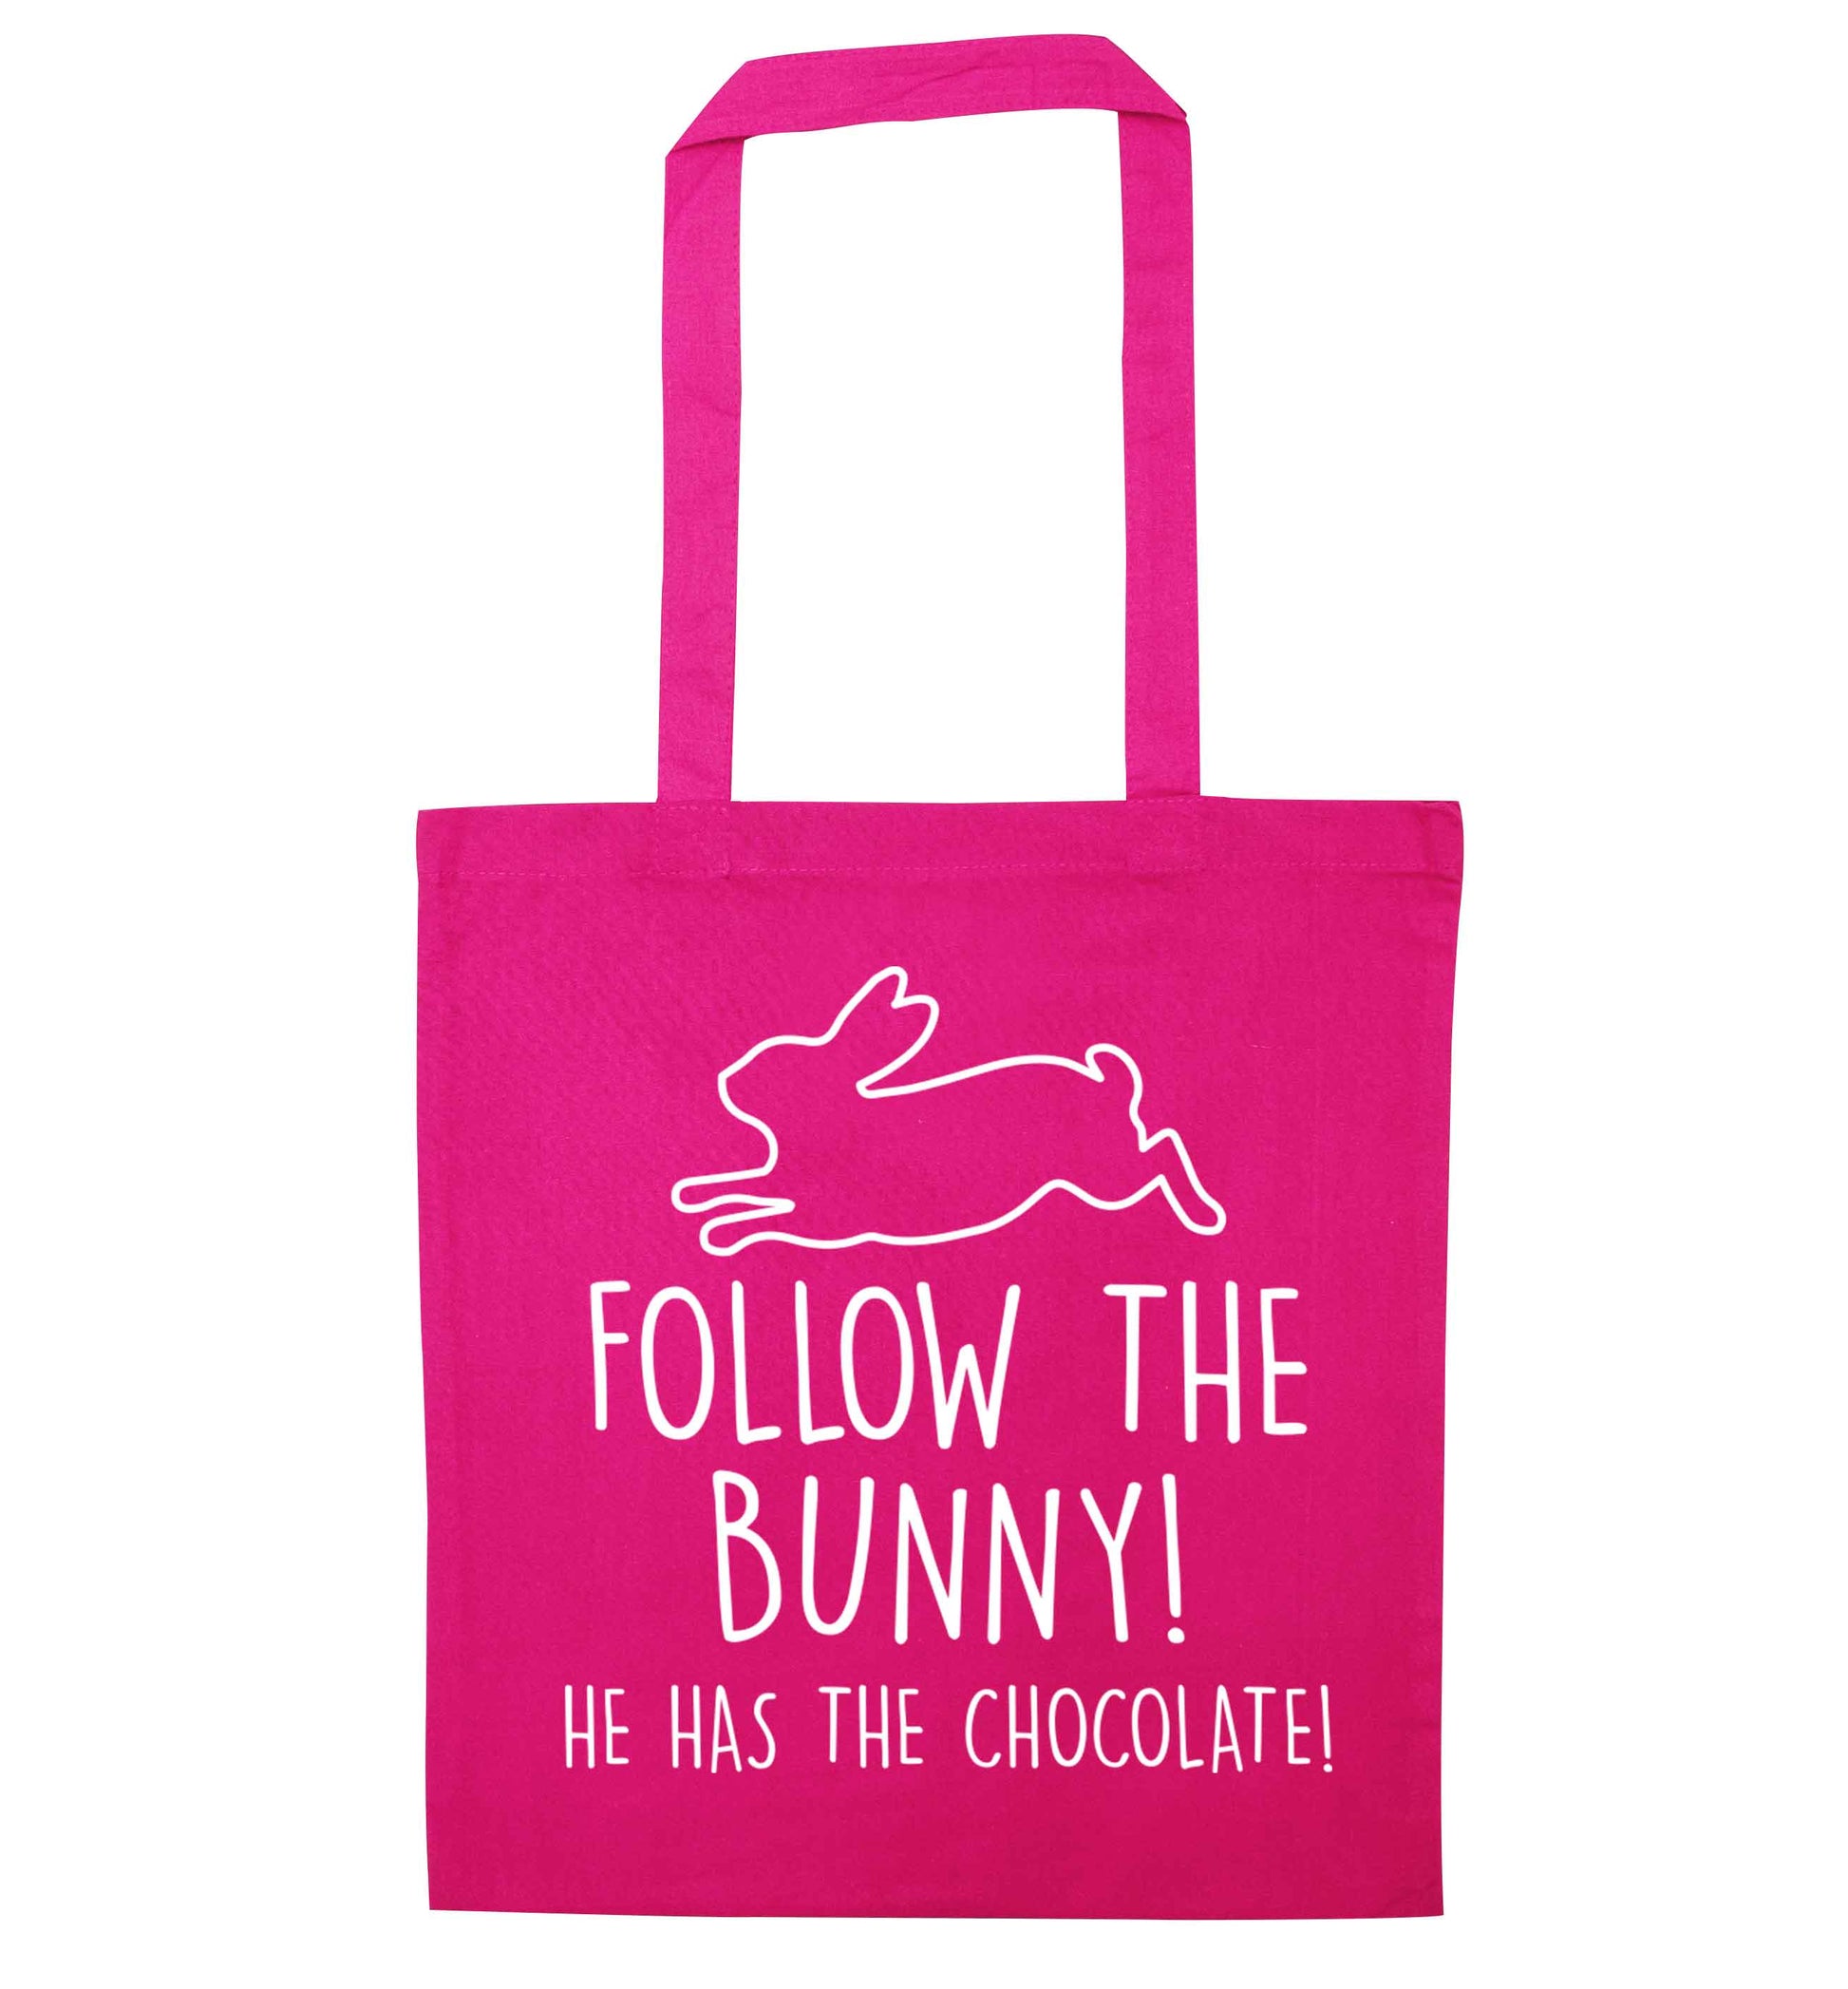 Follow the bunny! He has the chocolate pink tote bag